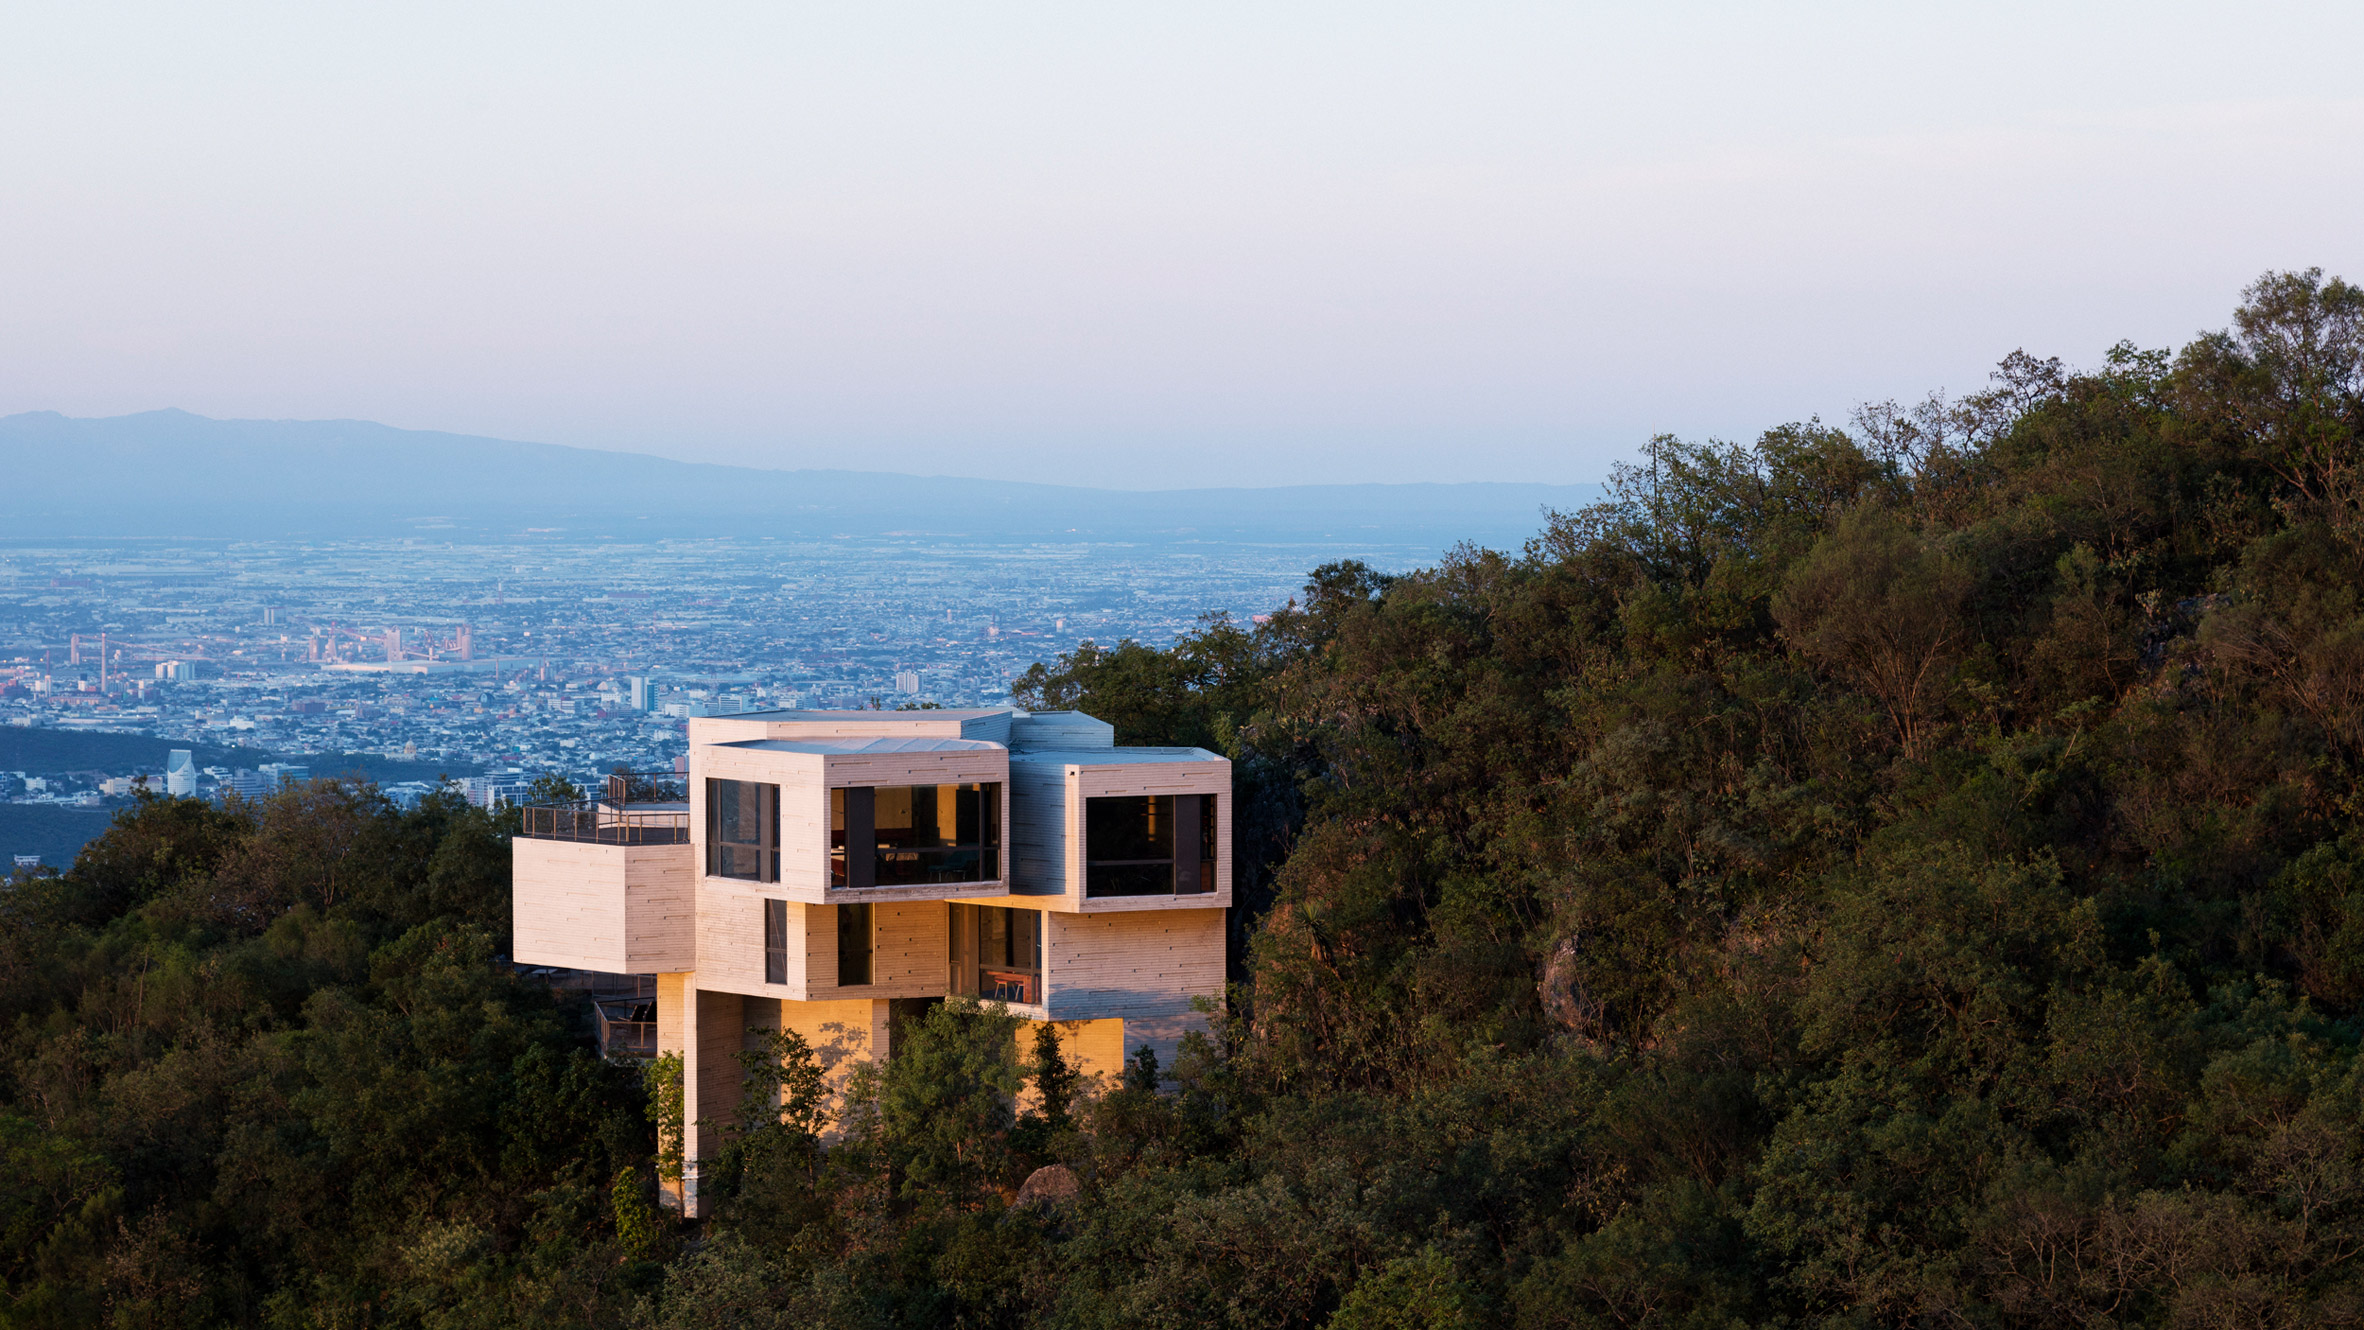 Casa Ventura emerging from the forested hillside